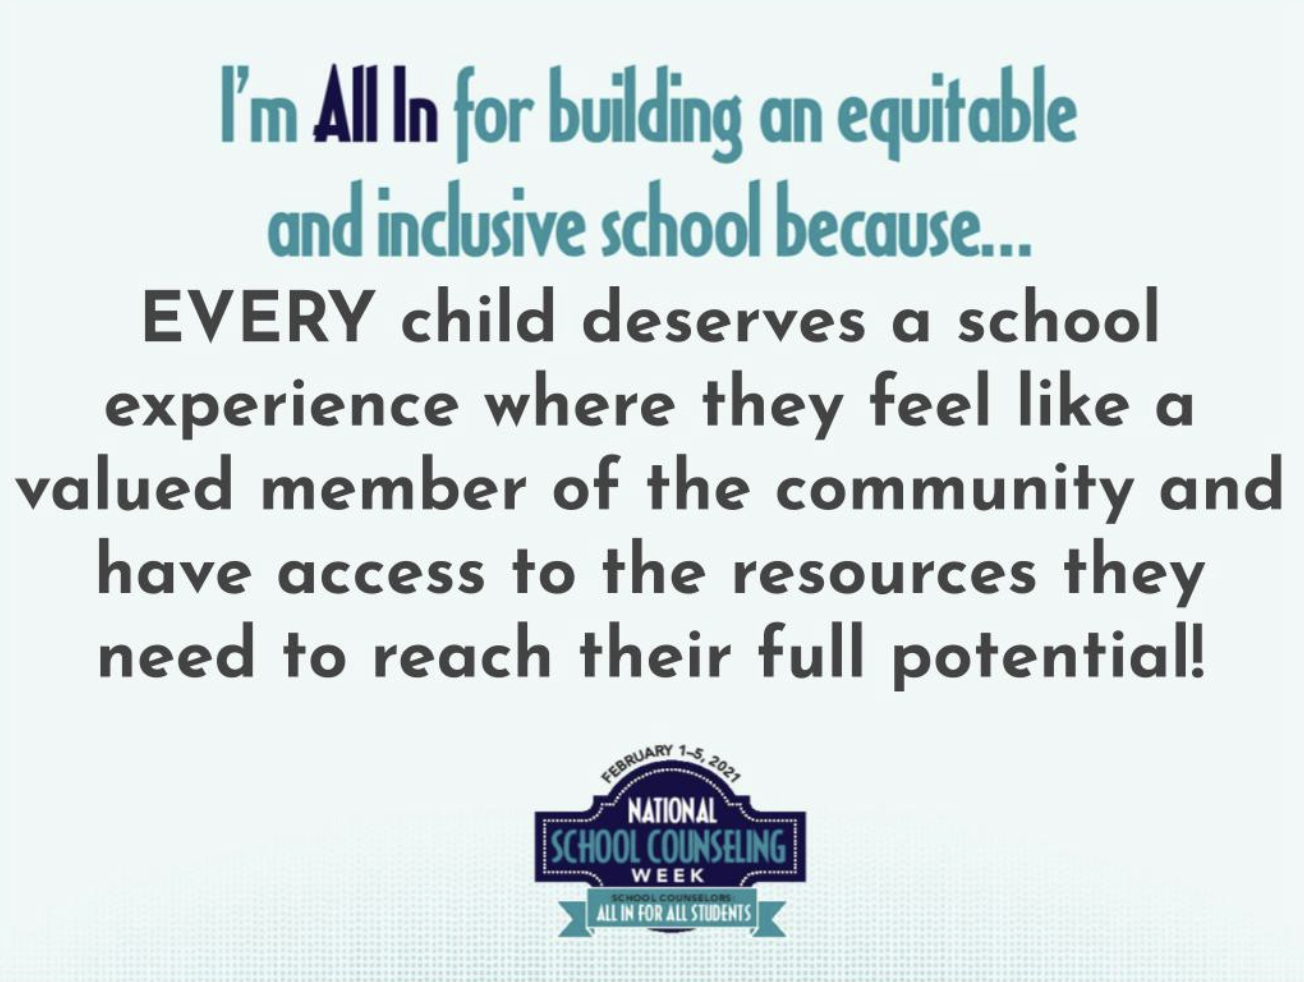 Light blue background with text "I'm all in for building, an equitable, an inclusive school, because… every child deserves a school experience where they feel like a valued member of the community and have access to the resources they need to reach their full potential!"